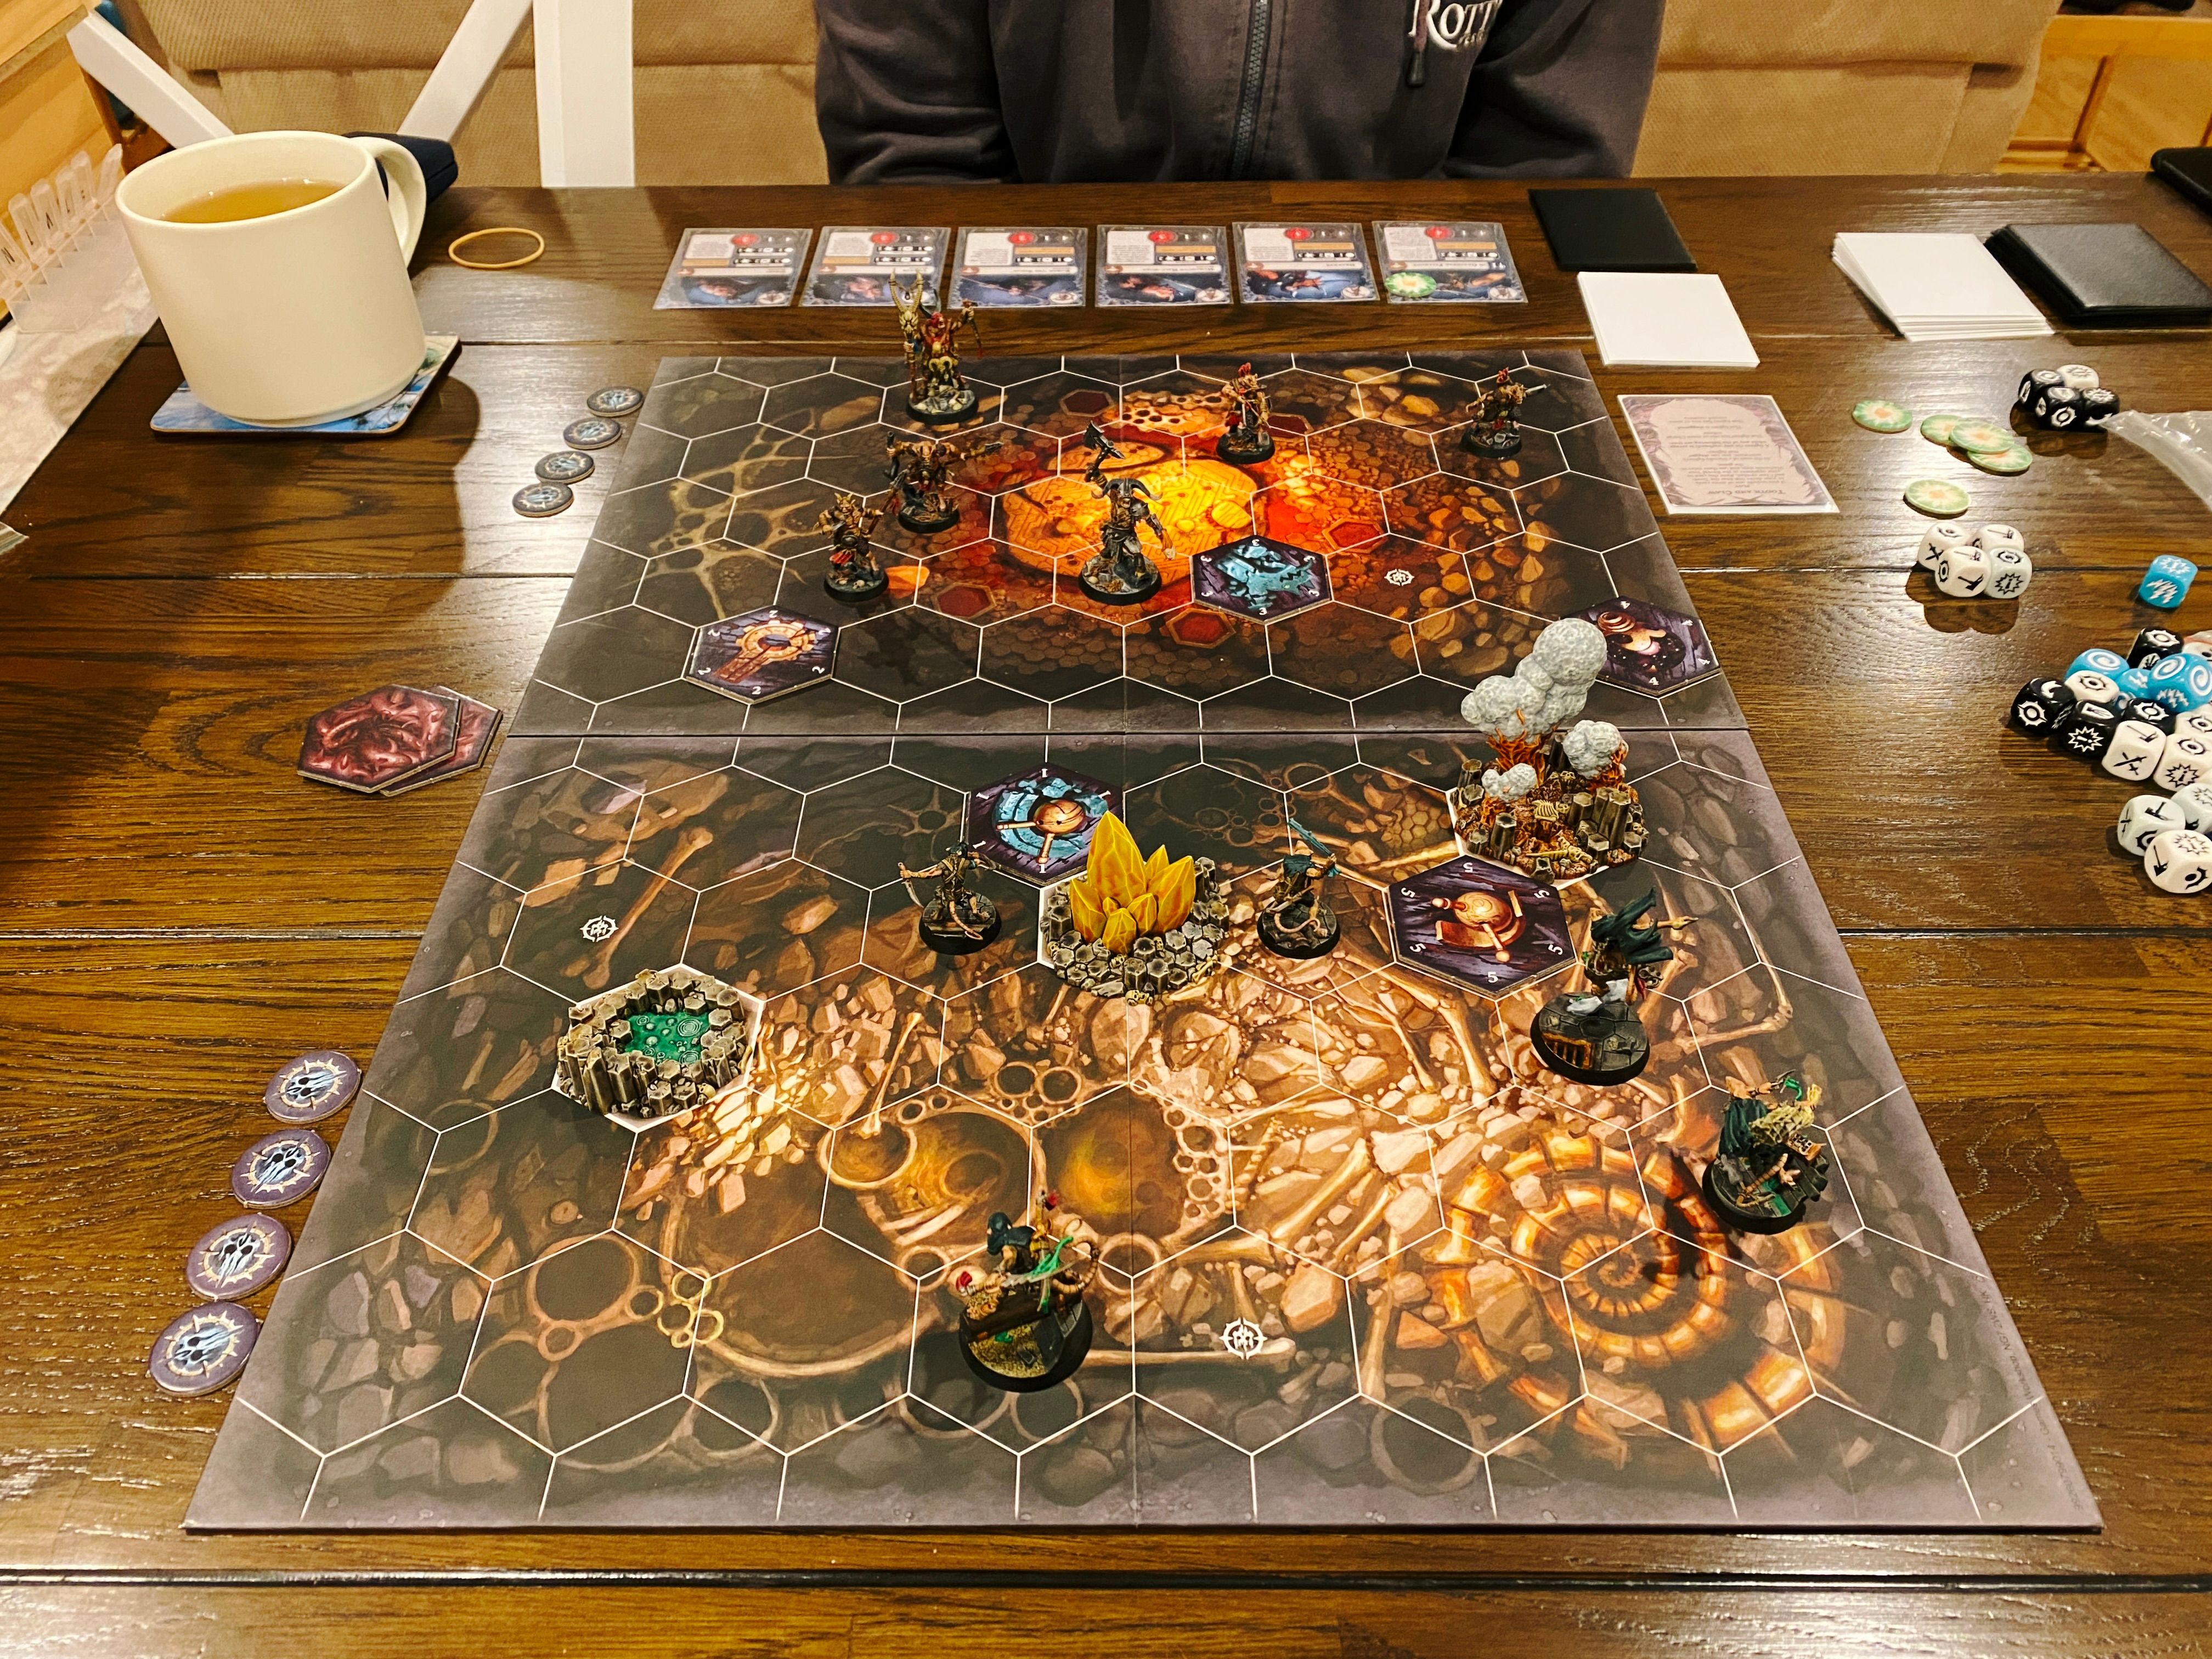 A photo of a Warhammer Underworlds game board. It has hex tiles on it, and the artwork looks like the inside of a cave. Closest to the camera are Skittershank's Clawpack, which consists five ratmen in various dynamic poses (one of them is in the middle of leaping over a smoke bomb he's just set off). At the other end of the board are the six goatmen of Grashrak's Despoilers: two are larger and more intimidating looking, one is holding a giant axe in the air and is gripping the head of someone he just decapitated, and the other four are smaller and shabbier, wielding bows and spears.